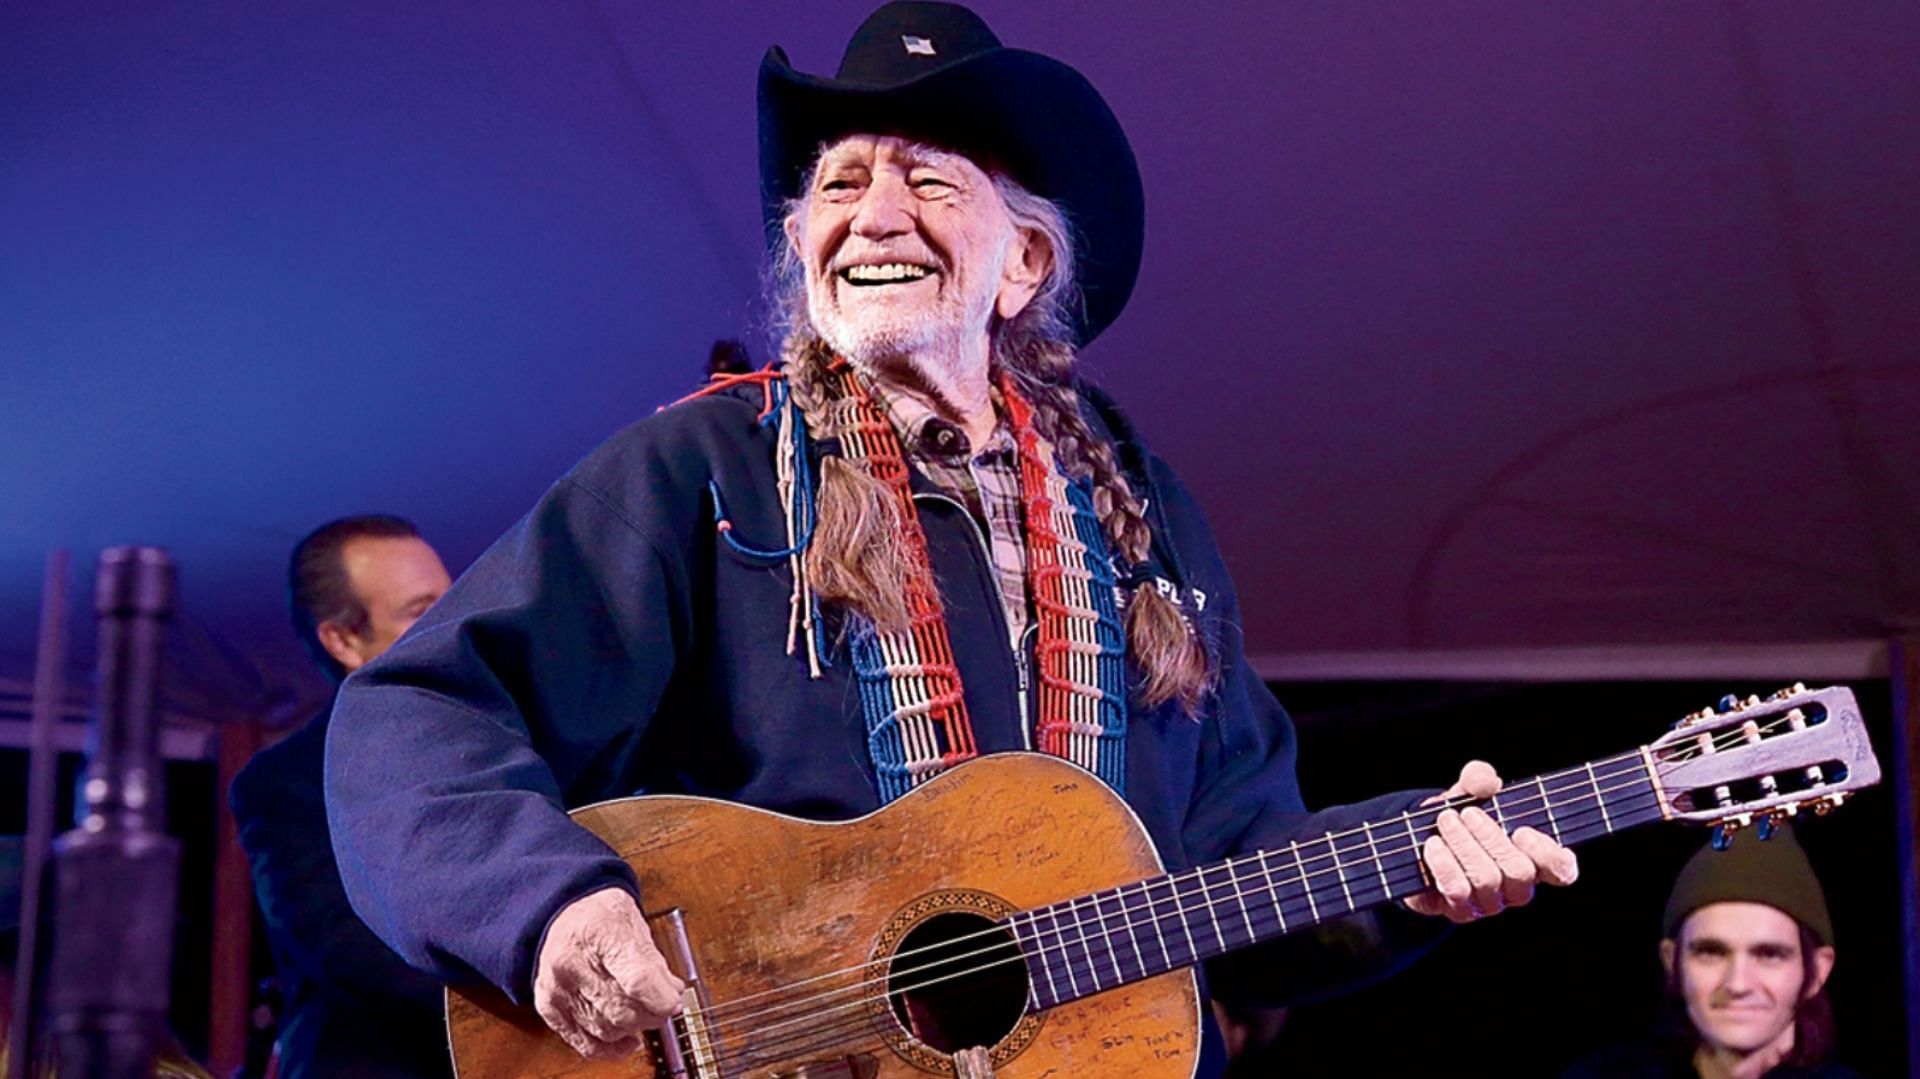 Willie Nelson is among the headliners at this year